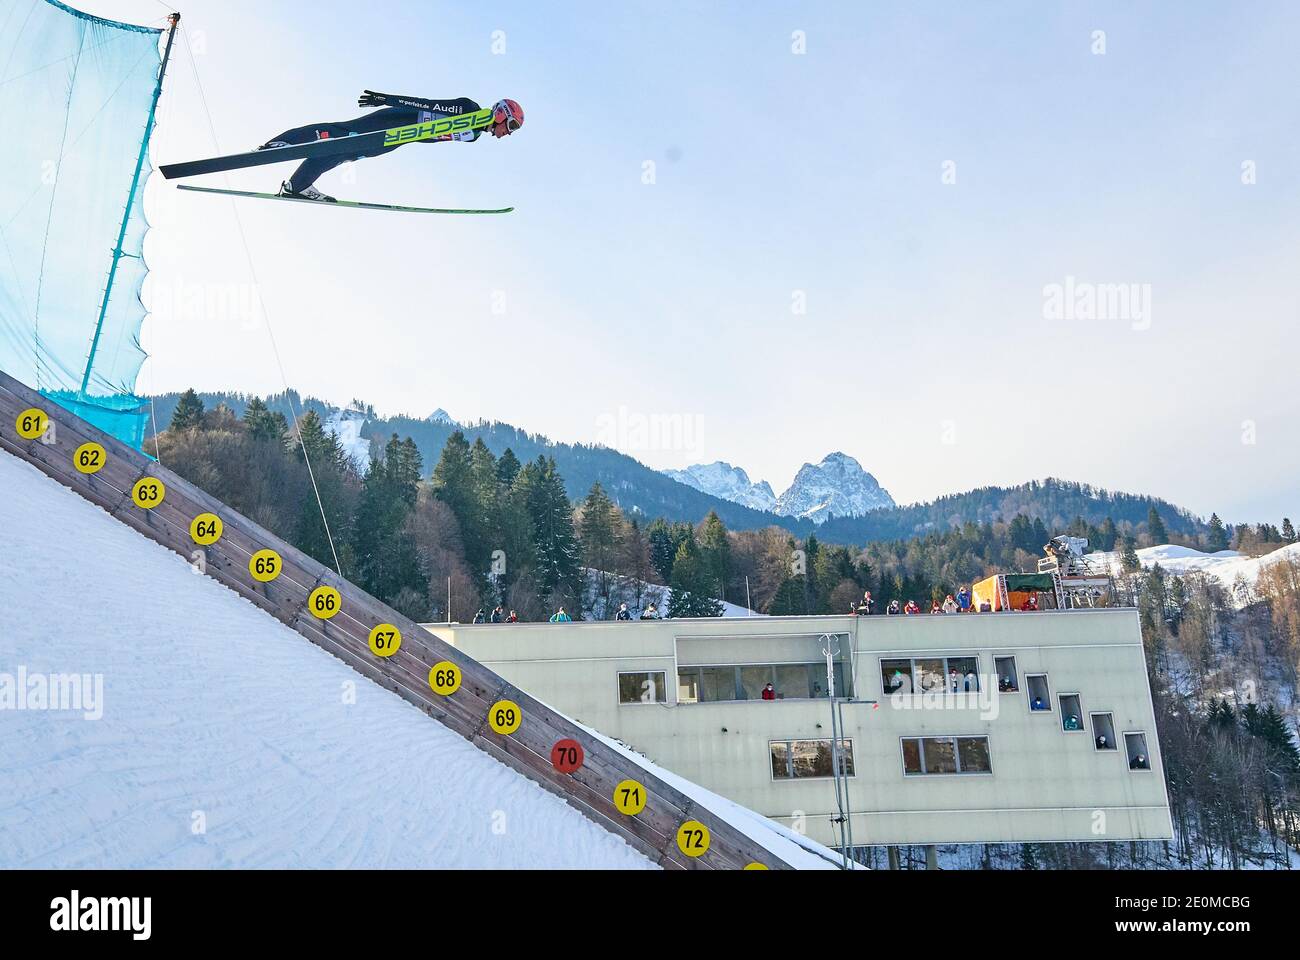 Severin FREUND, GER in action in front of Zugspitze mountain at the Four Hills Tournament Ski Jumping at Olympic Stadium, Grosse Olympiaschanze in Garmisch-Partenkirchen, Bavaria, Germany, January 01, 2021.  © Peter Schatz / Alamy Live News Stock Photo